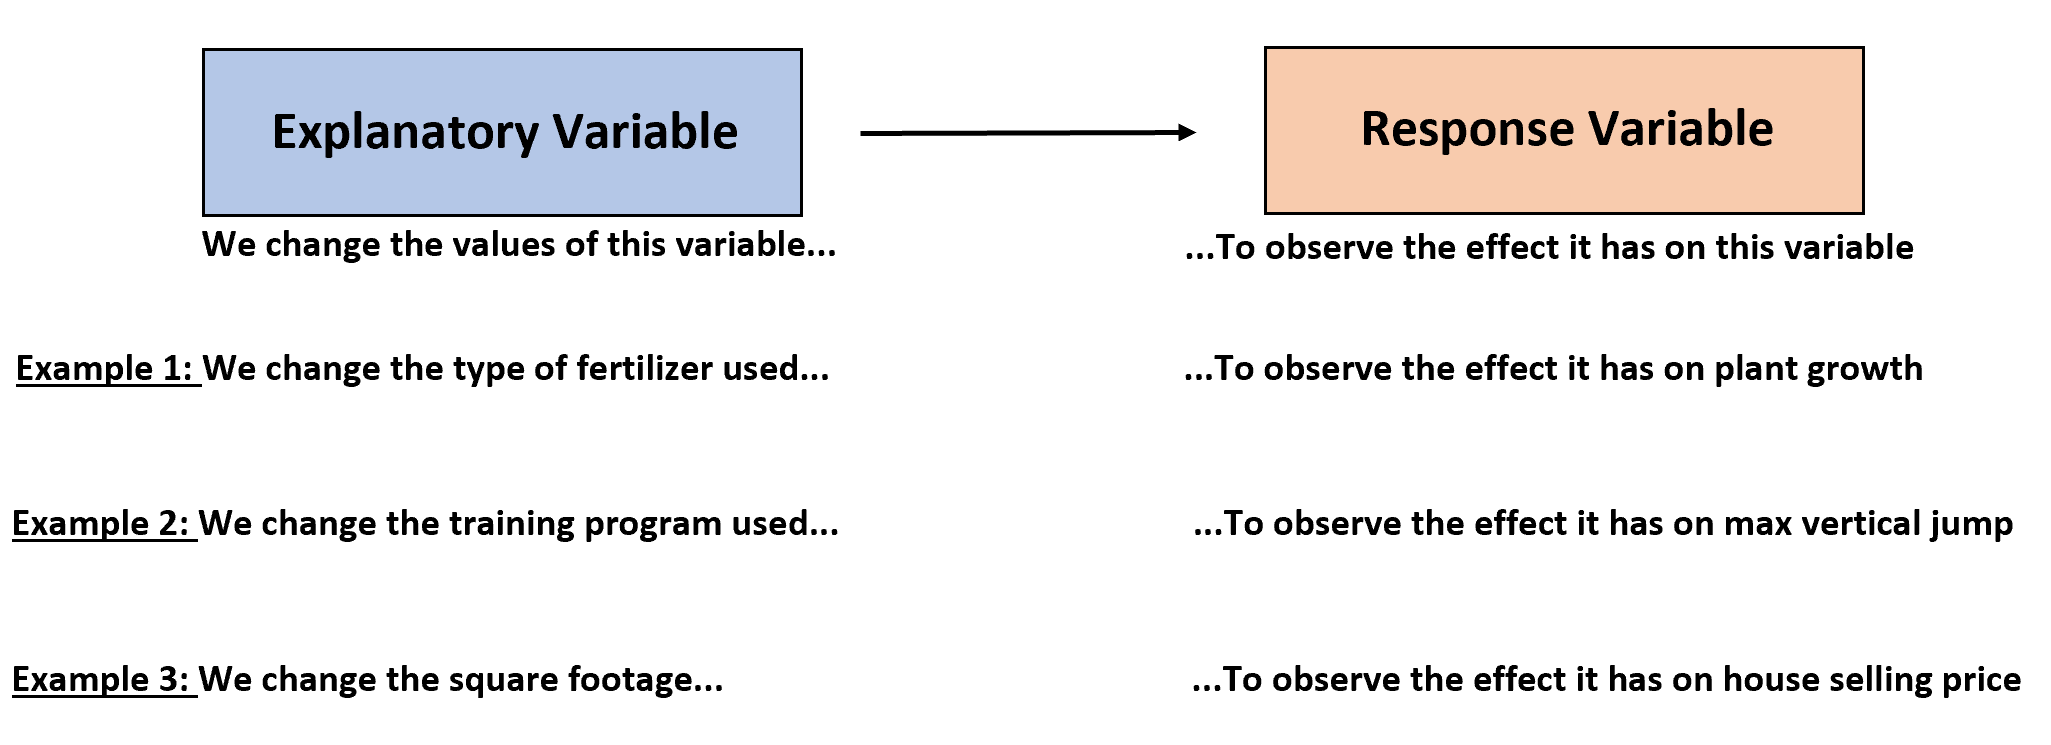 Explanatory and response variable differences